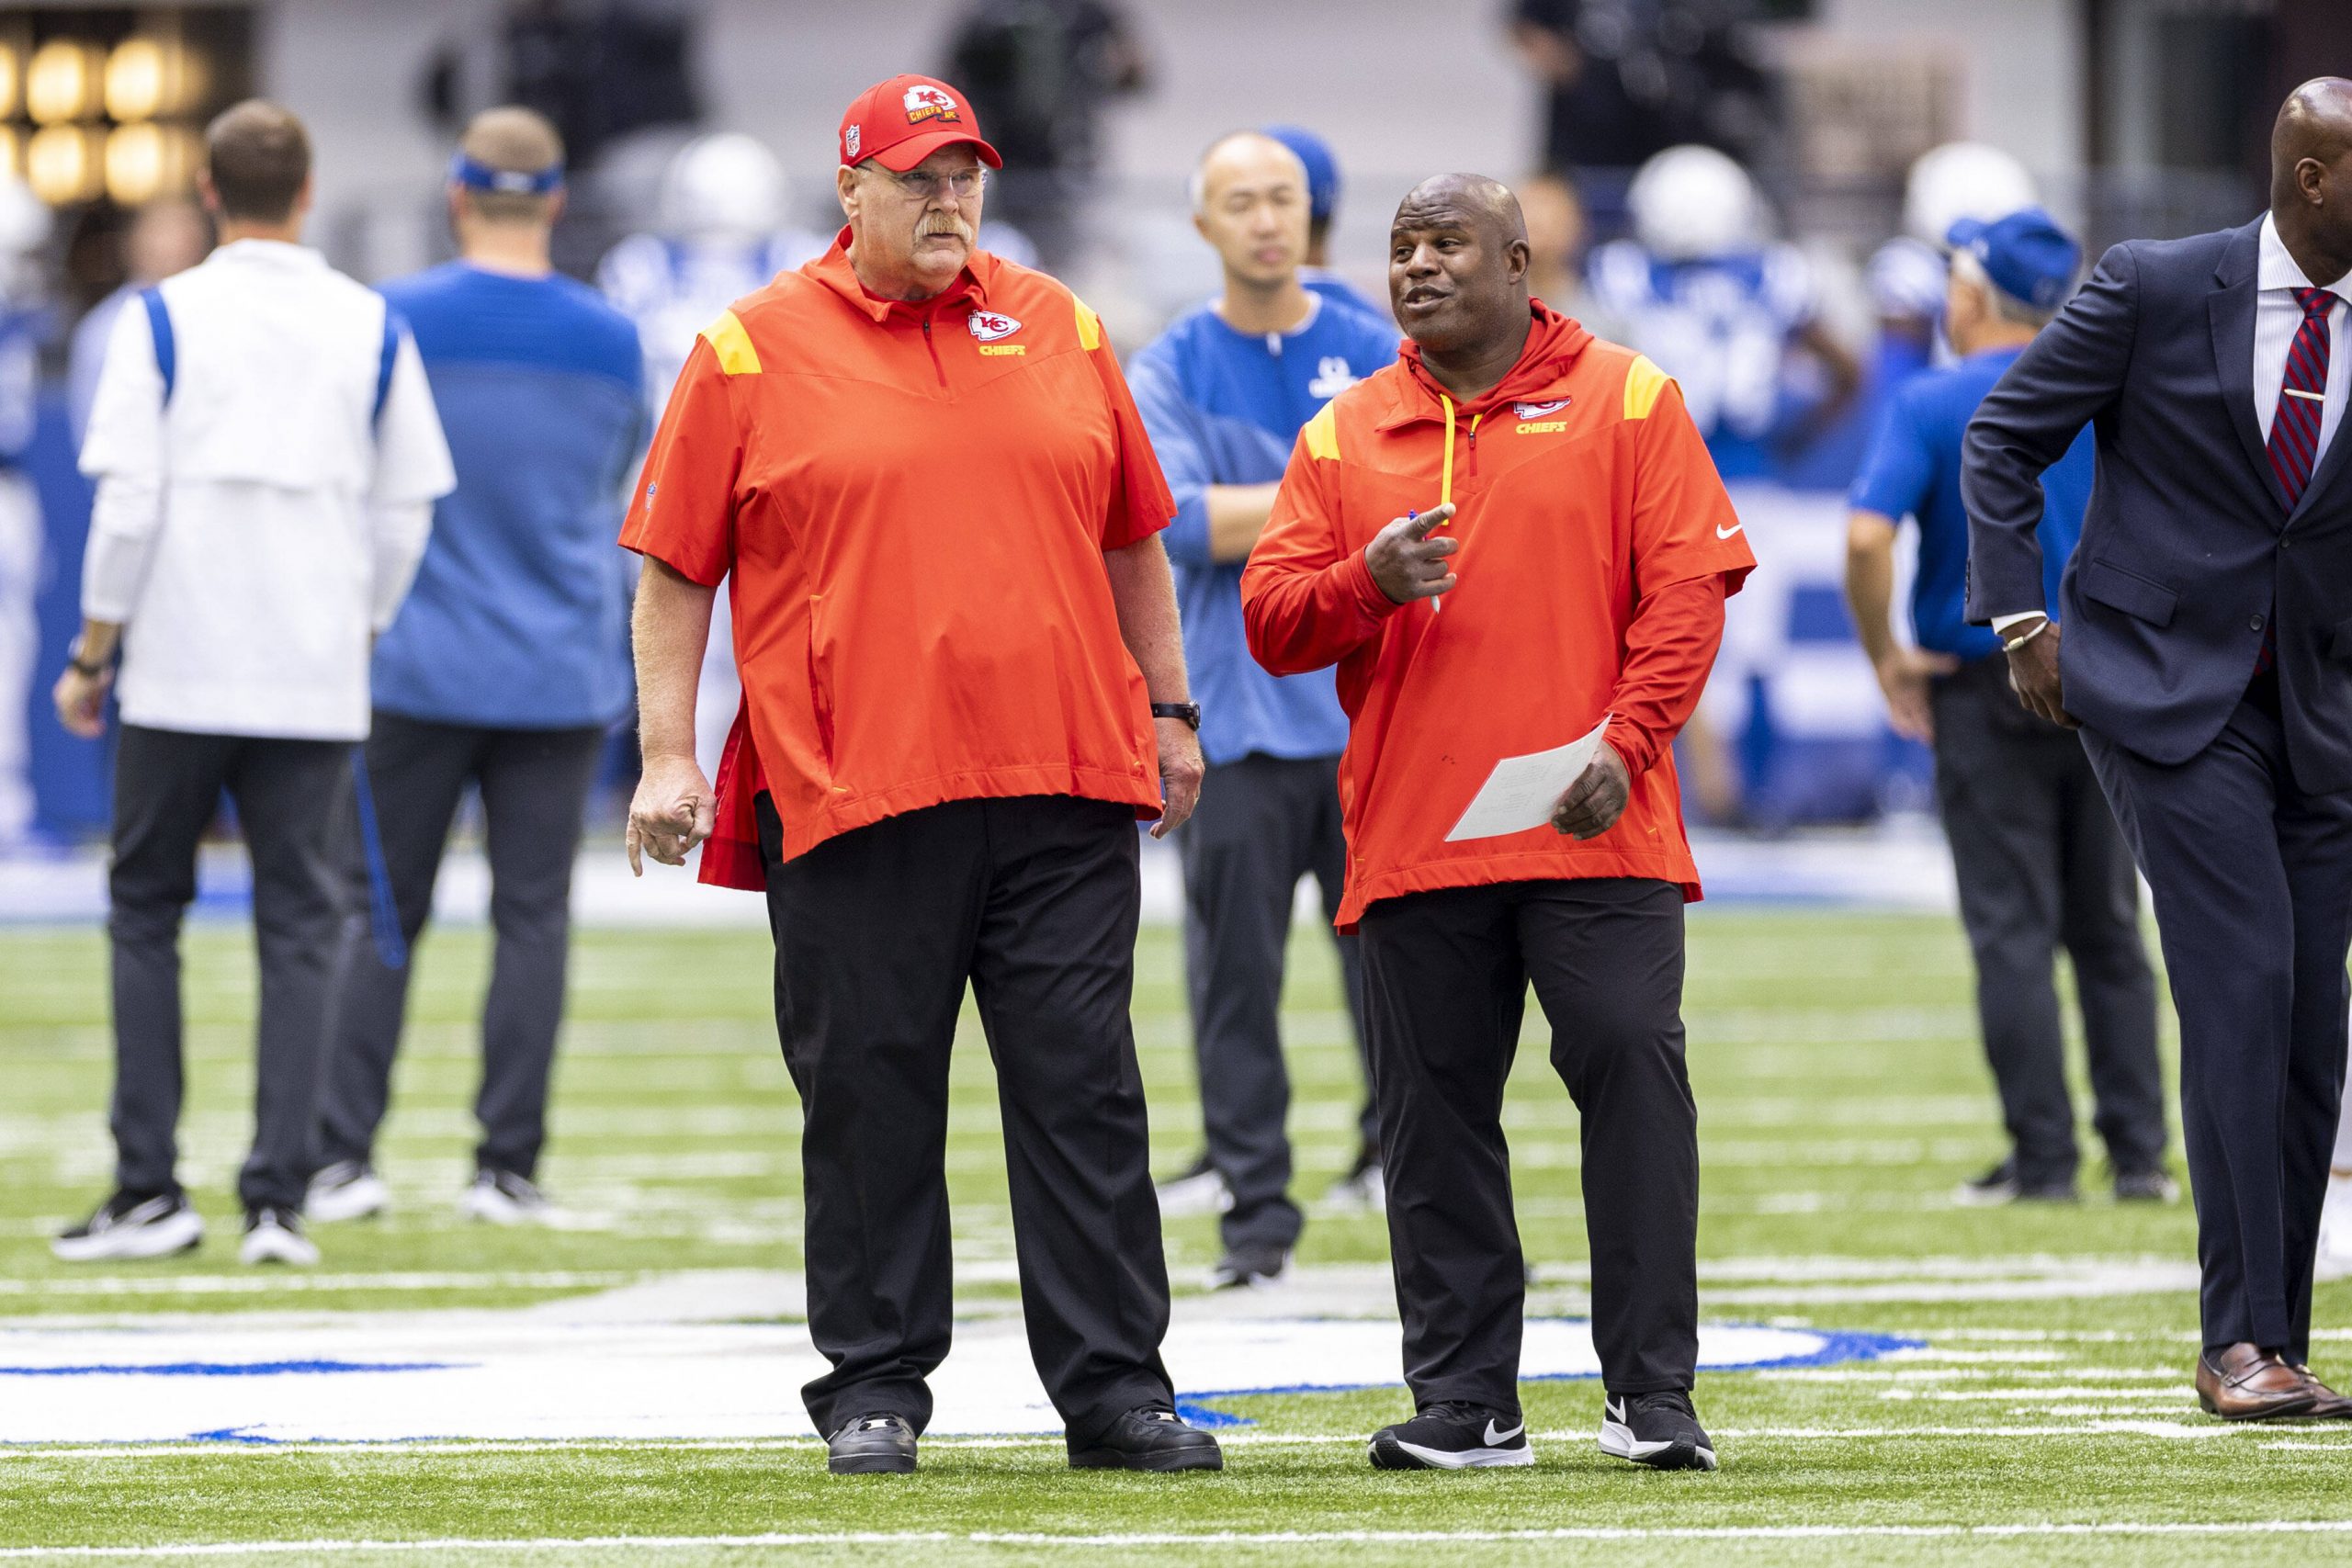 September 25, 2022: Kansas City Chiefs head coach Andy Reid and Offensive Coordinator Eric Bieniemy during pregame of NFL, American Football Herren, USA football game action between the Kansas City Chiefs and the Indianapolis Colts at Lucas Oil Stadium in Indianapolis, Indiana. Indianapolis defeated Kansas City 20-17. /CSM. USA - ZUMAc04_ 20220925_zaf_c04_183 Copyright: xJohnxMersitsx